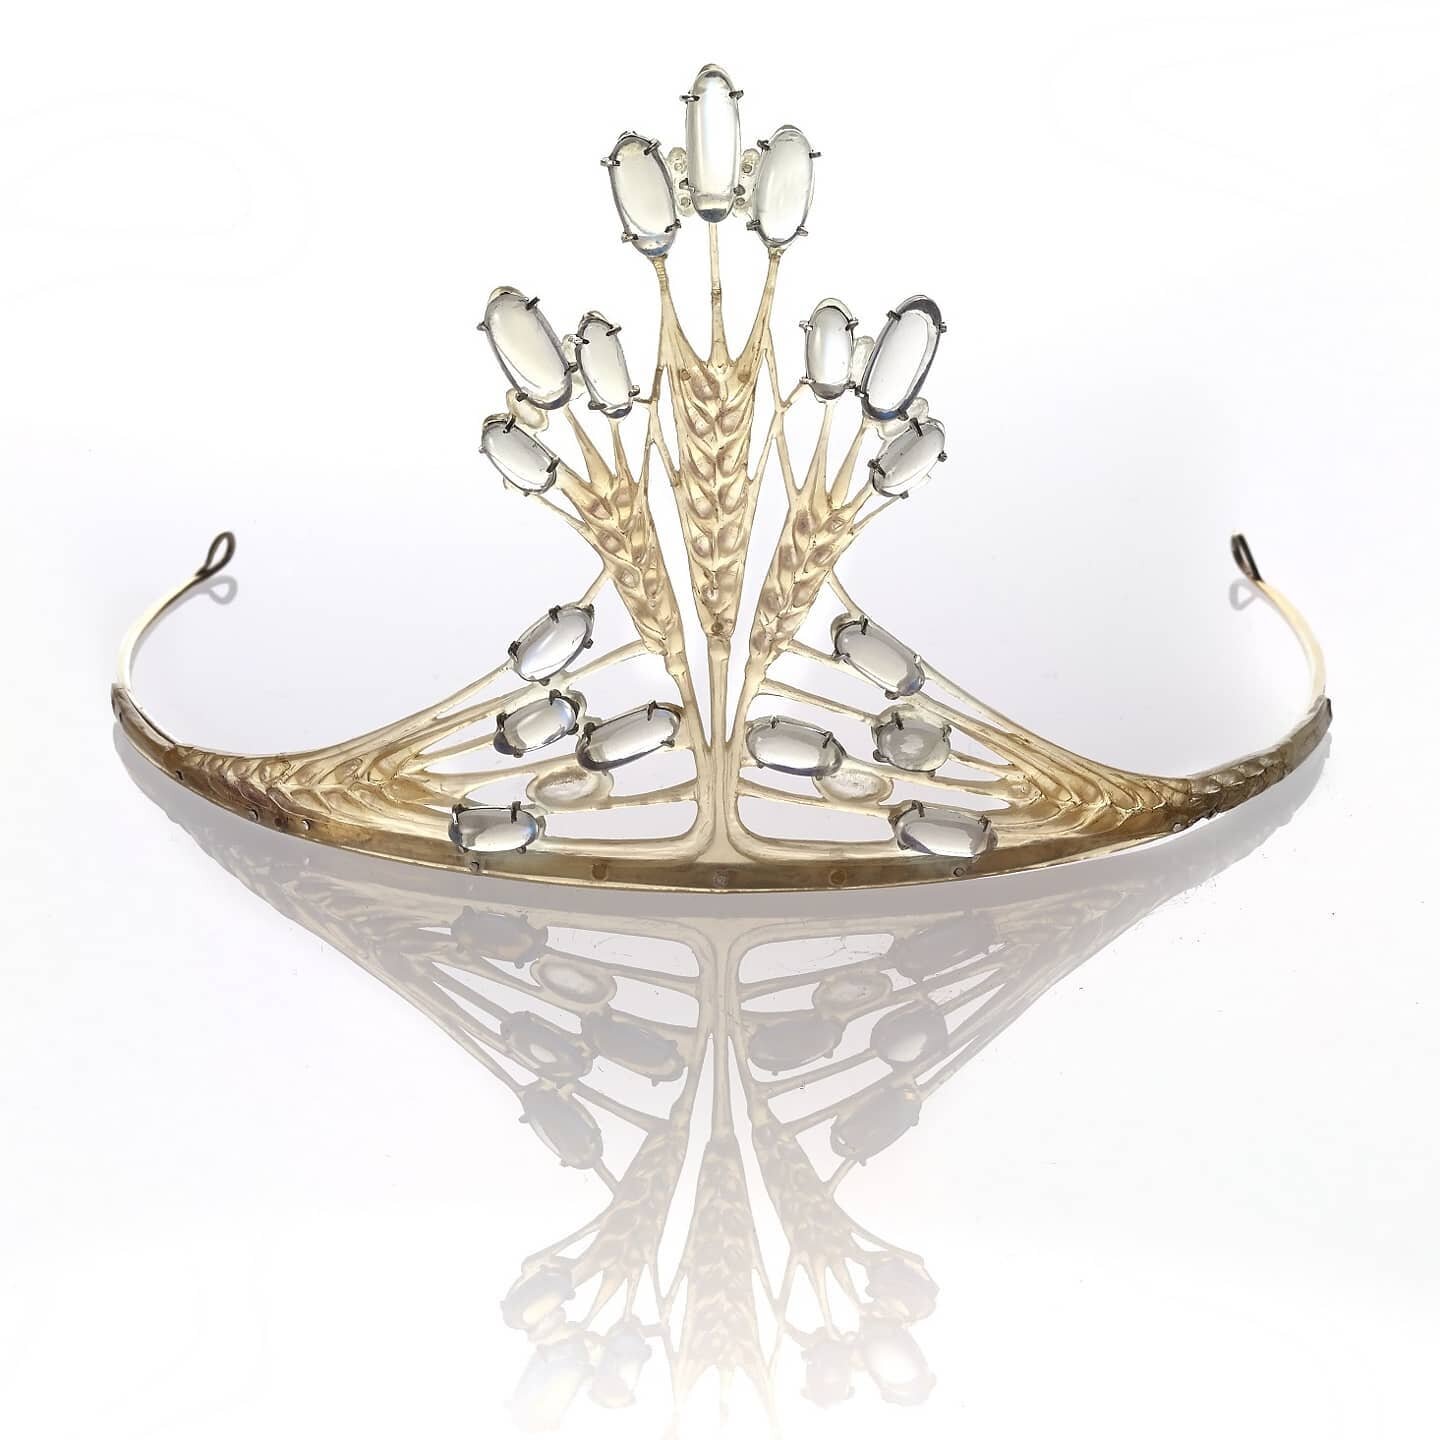 Tiara with corn featuring moonstones and carved horn by English jeweler, silversmith, and teacher of jewellery making Frederick James Partridge (1877-1942).
In 1910, Partridge set up a studio in Soho London where he designed for Liberty &amp; Co. amo